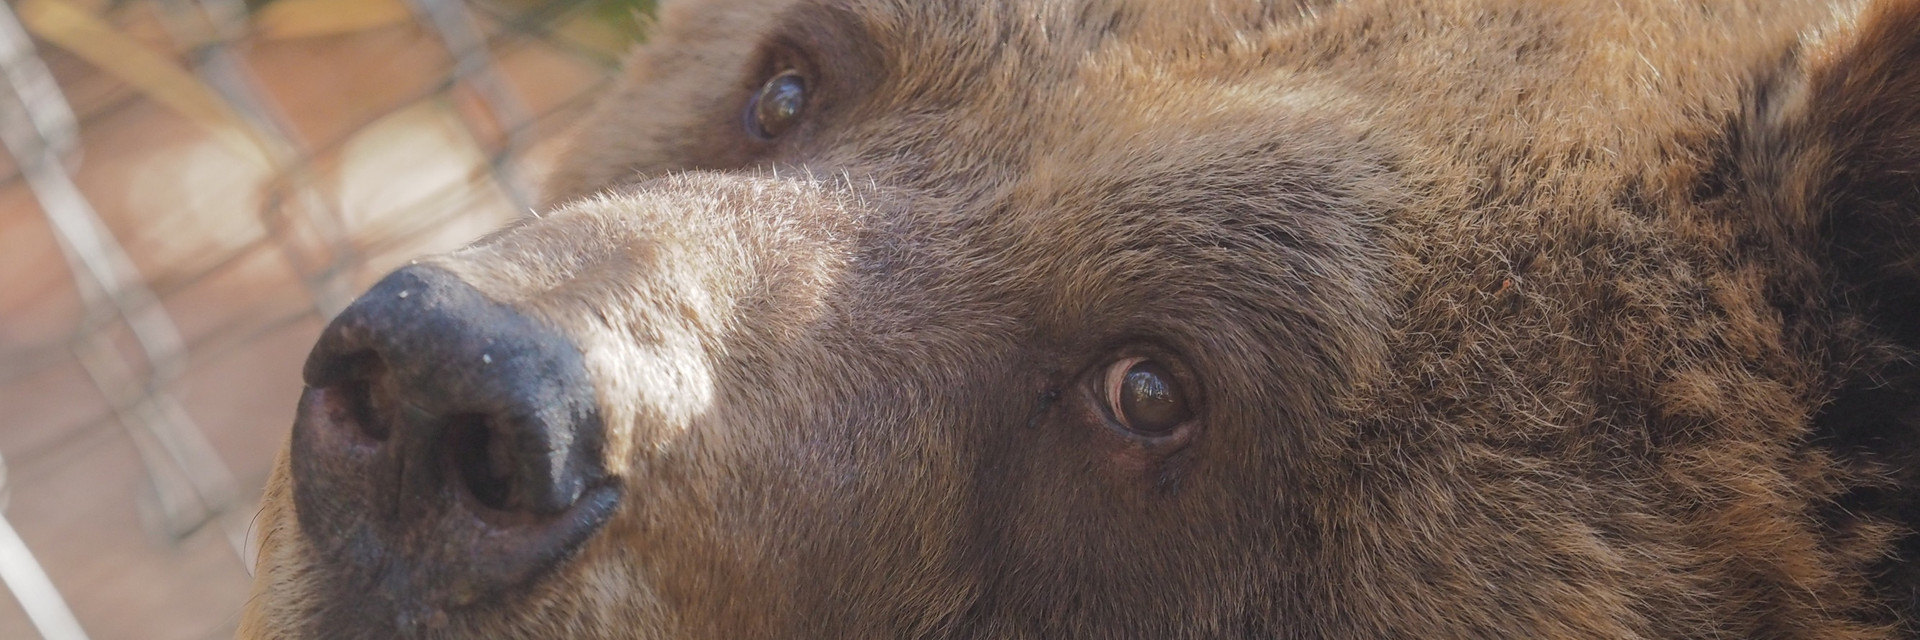 BEAR SANCTUARY Arbesbach - A Project of FOUR PAWS